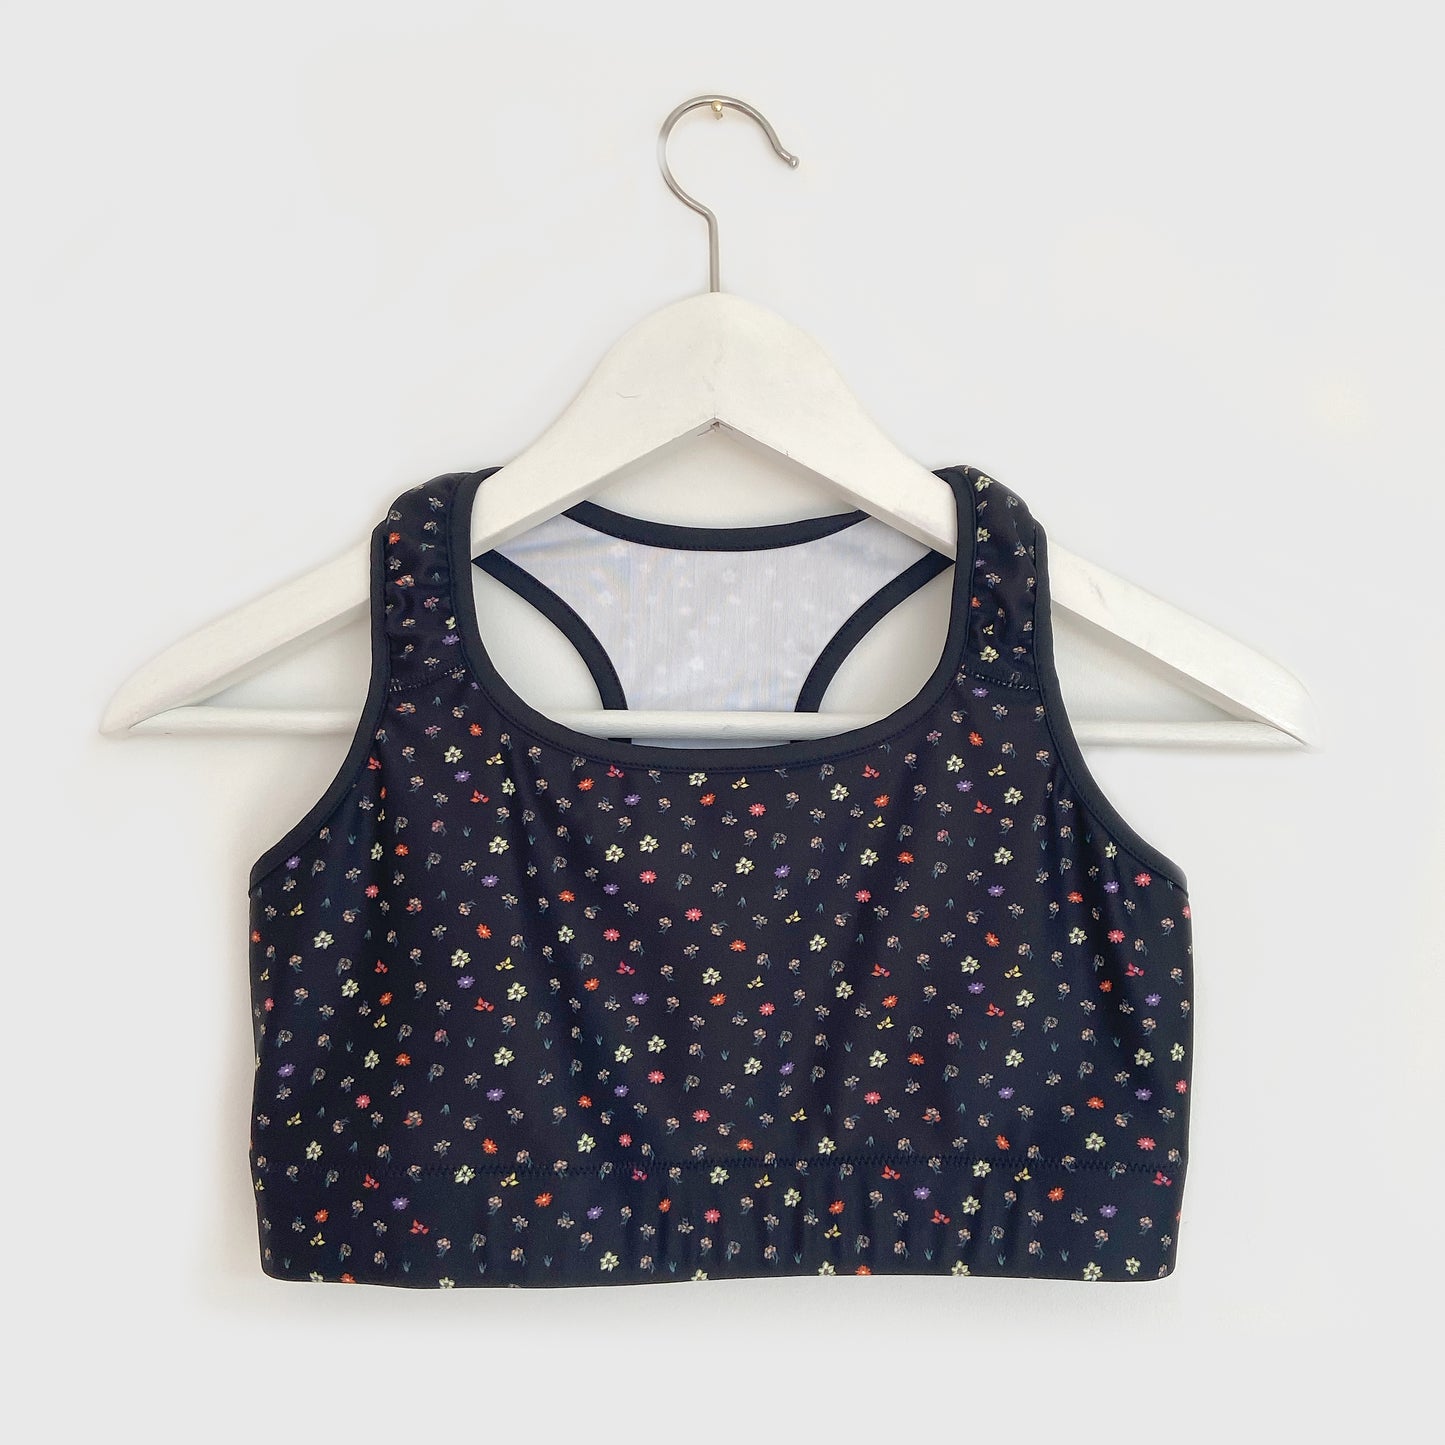 Ditsy Floral Sports Bra to match your Leggings or Shorts